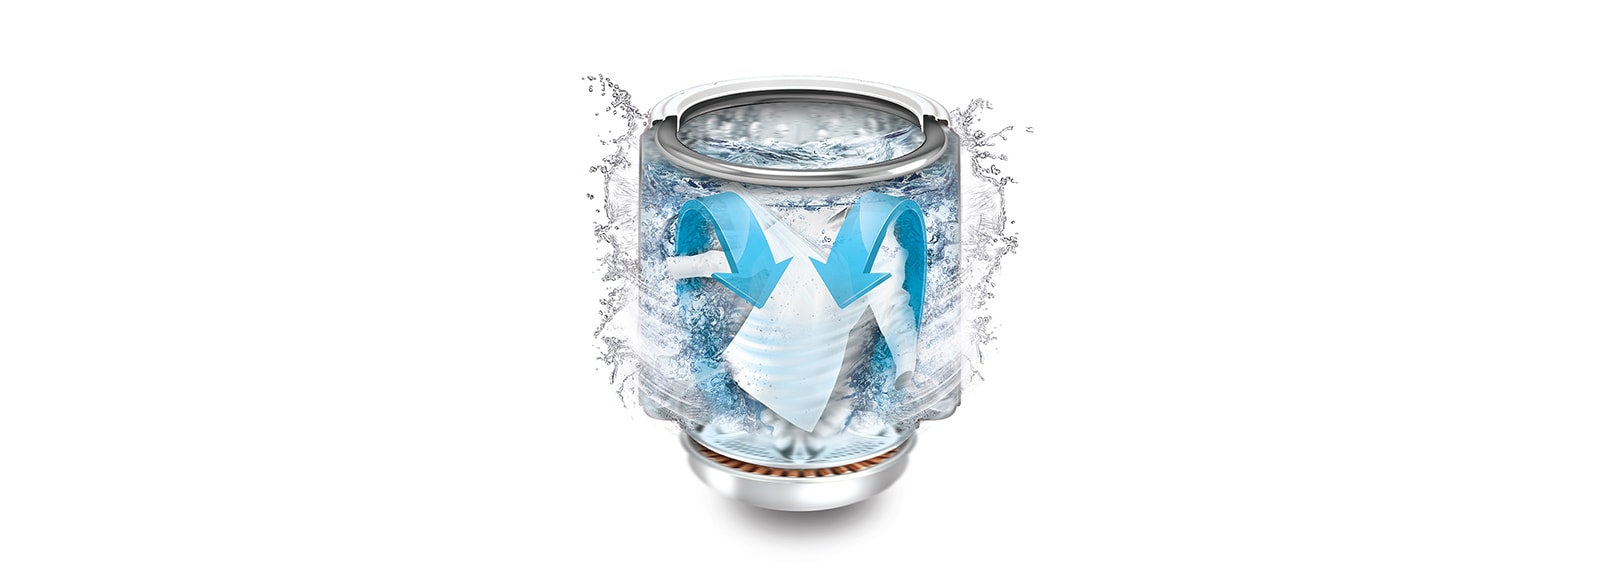 Two blue arrows show how the water moves up and down powerfully in the drum.